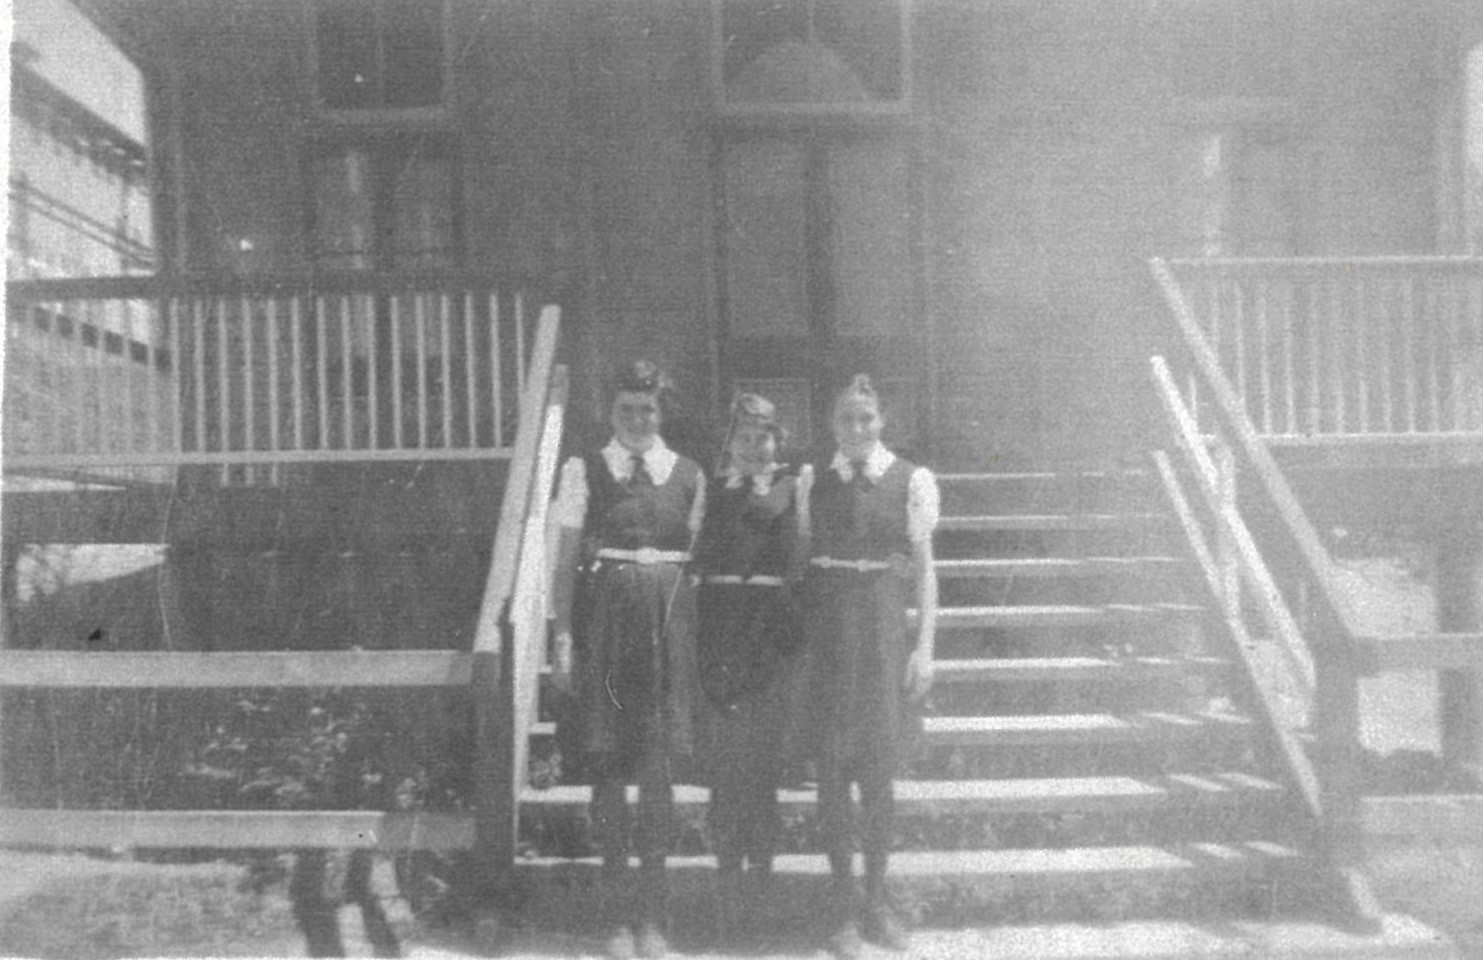 1944 Students on Day School steps